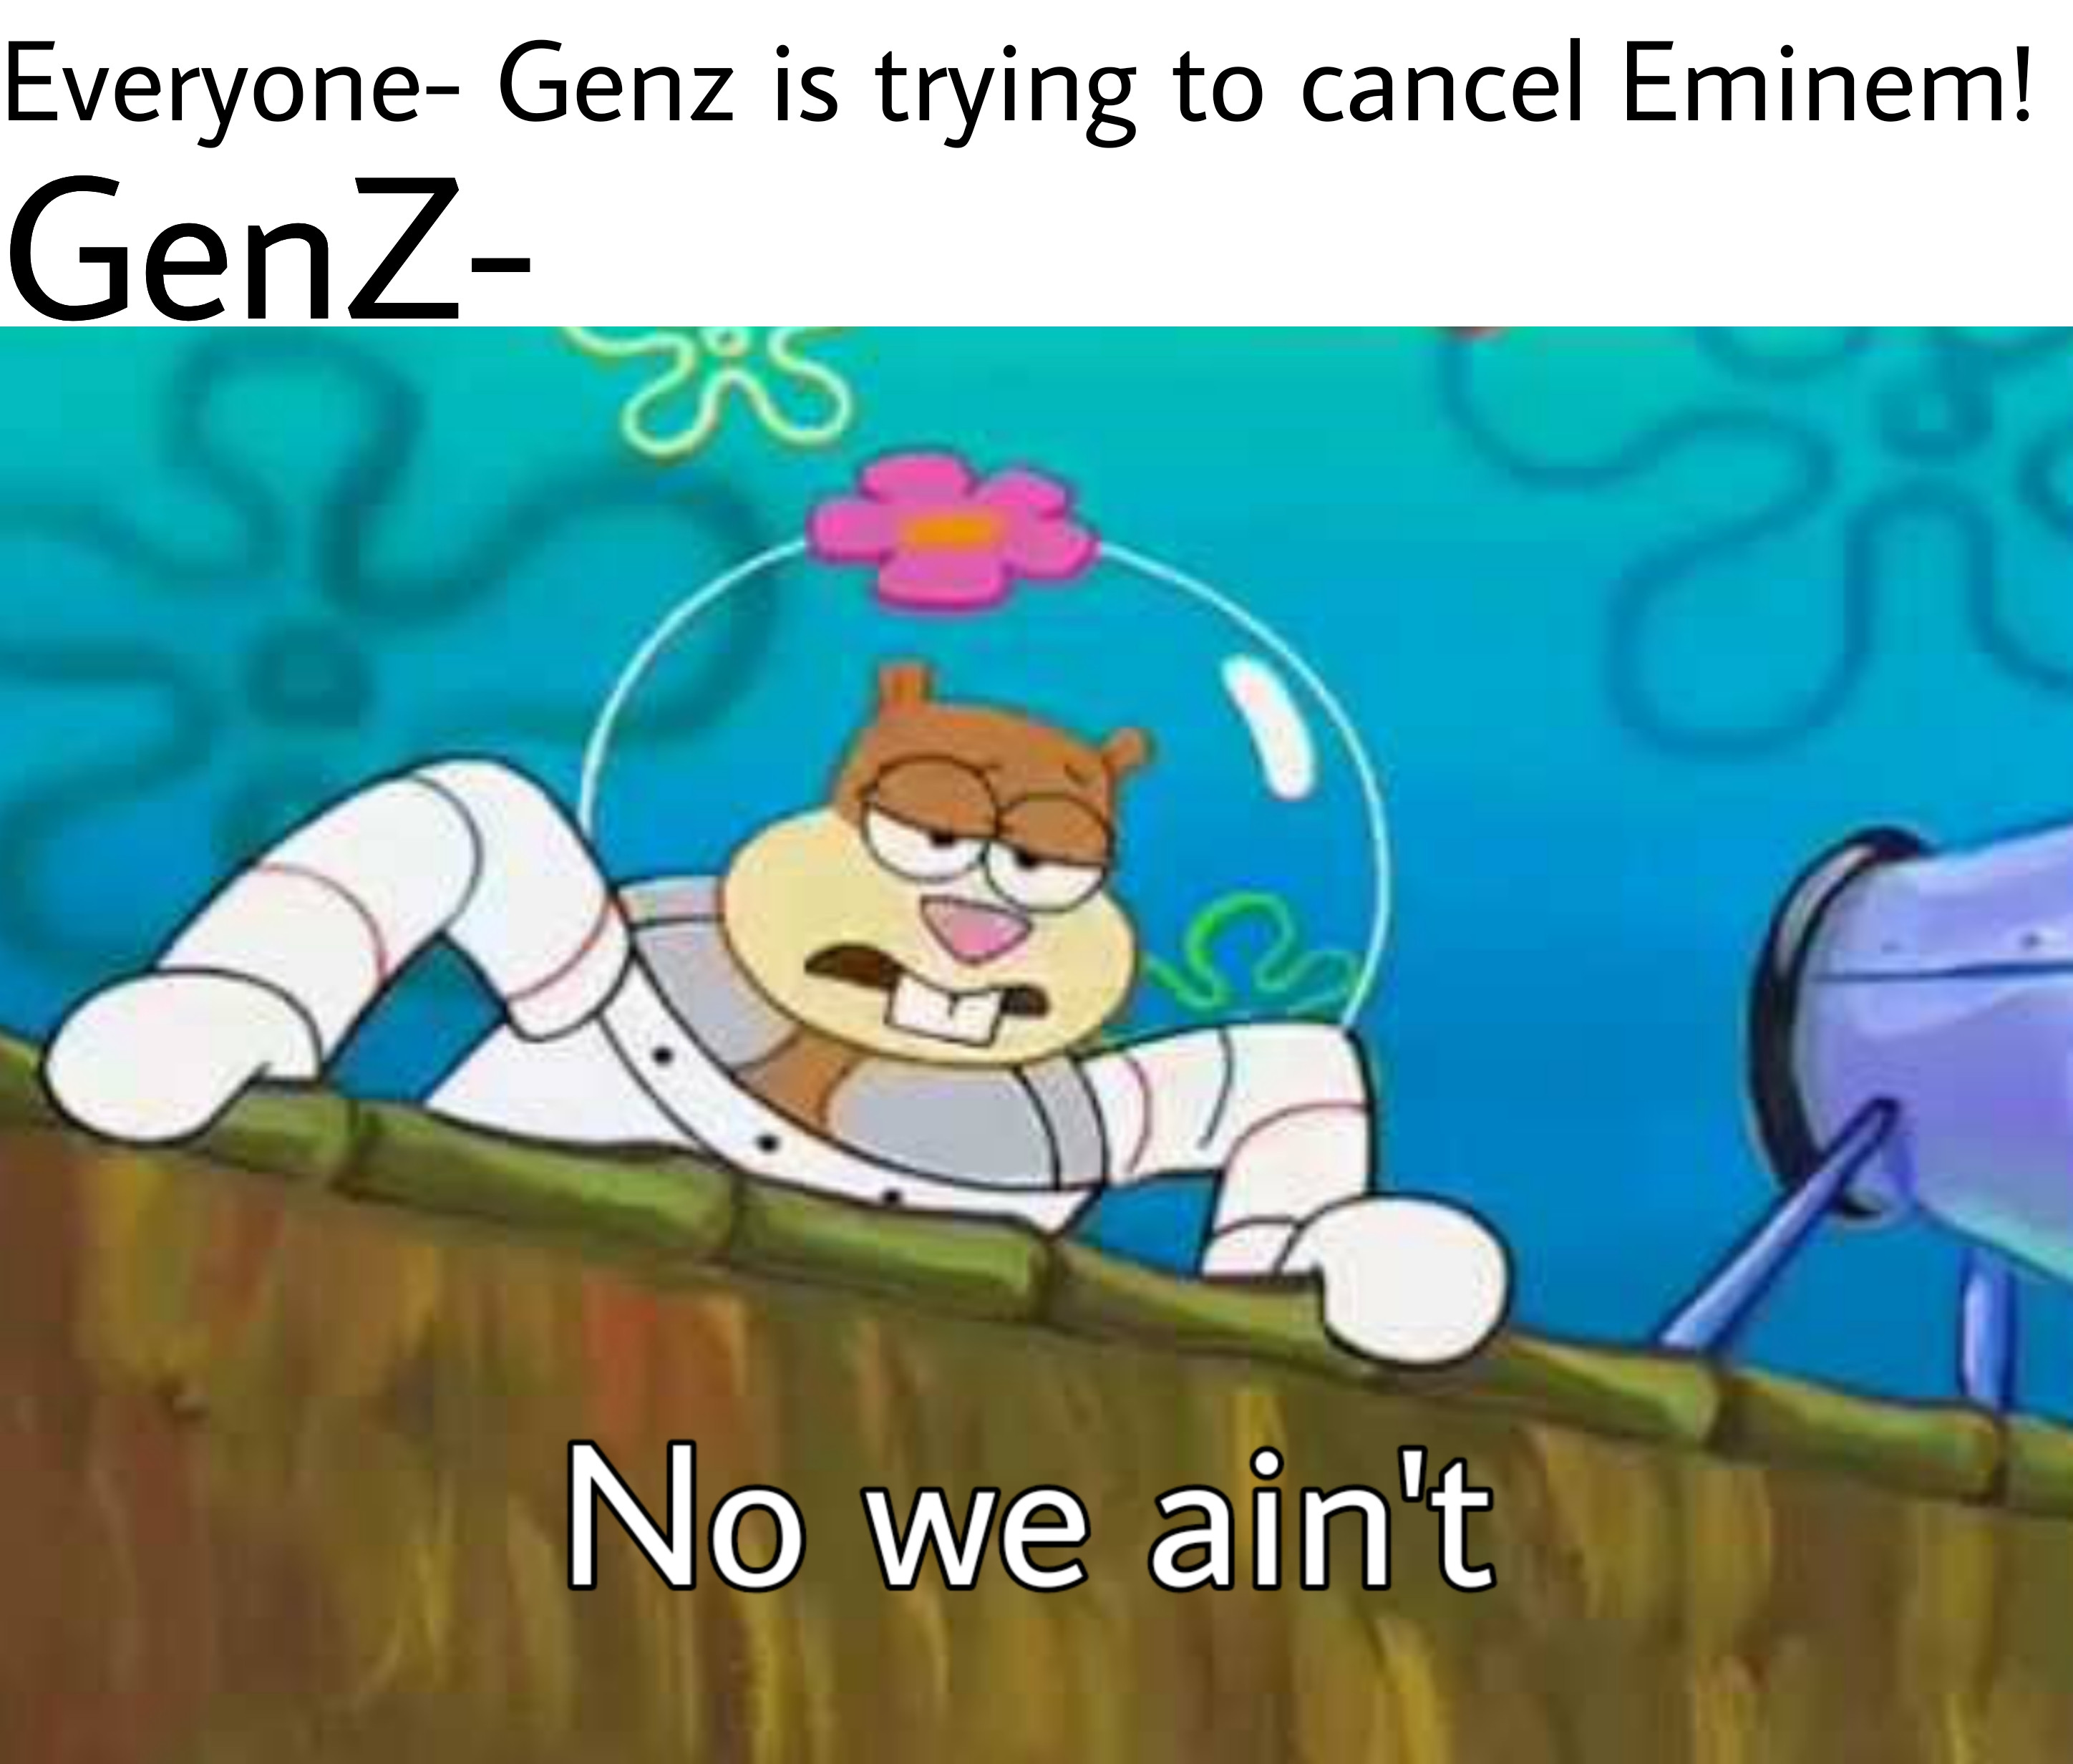 south america history memes - Everyone Genz is trying to cancel Eminem! GenZ 28 No we ain't